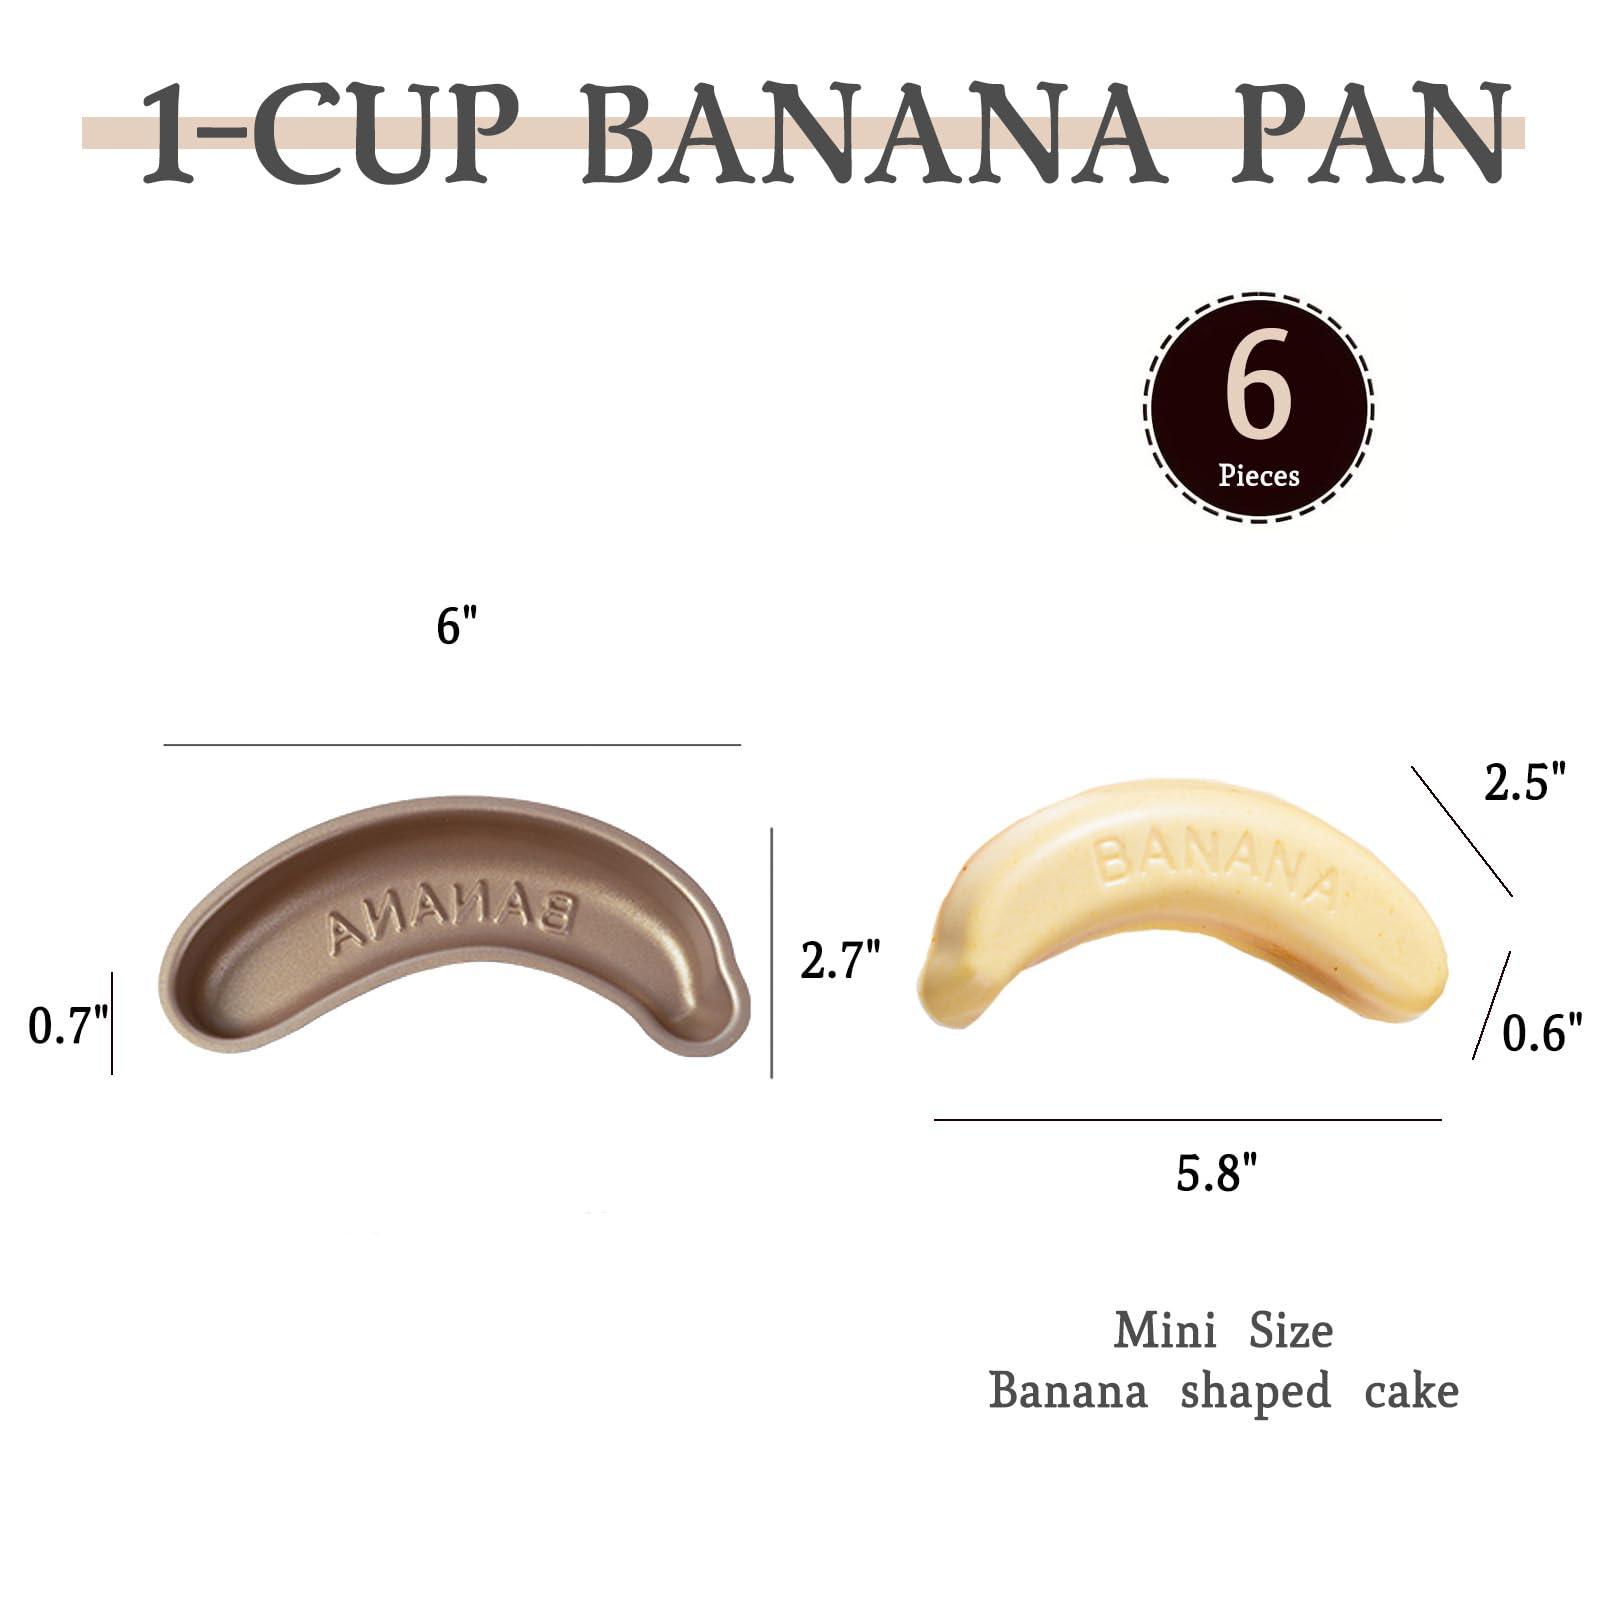 Marimer FORBAKE Non-Stick 6" Banana Shaped Pan Set - 6-Pack Golden Aluminum Baking Molds for Fun and Whimsical Cakes - Bake Like a Pro! - CookCave